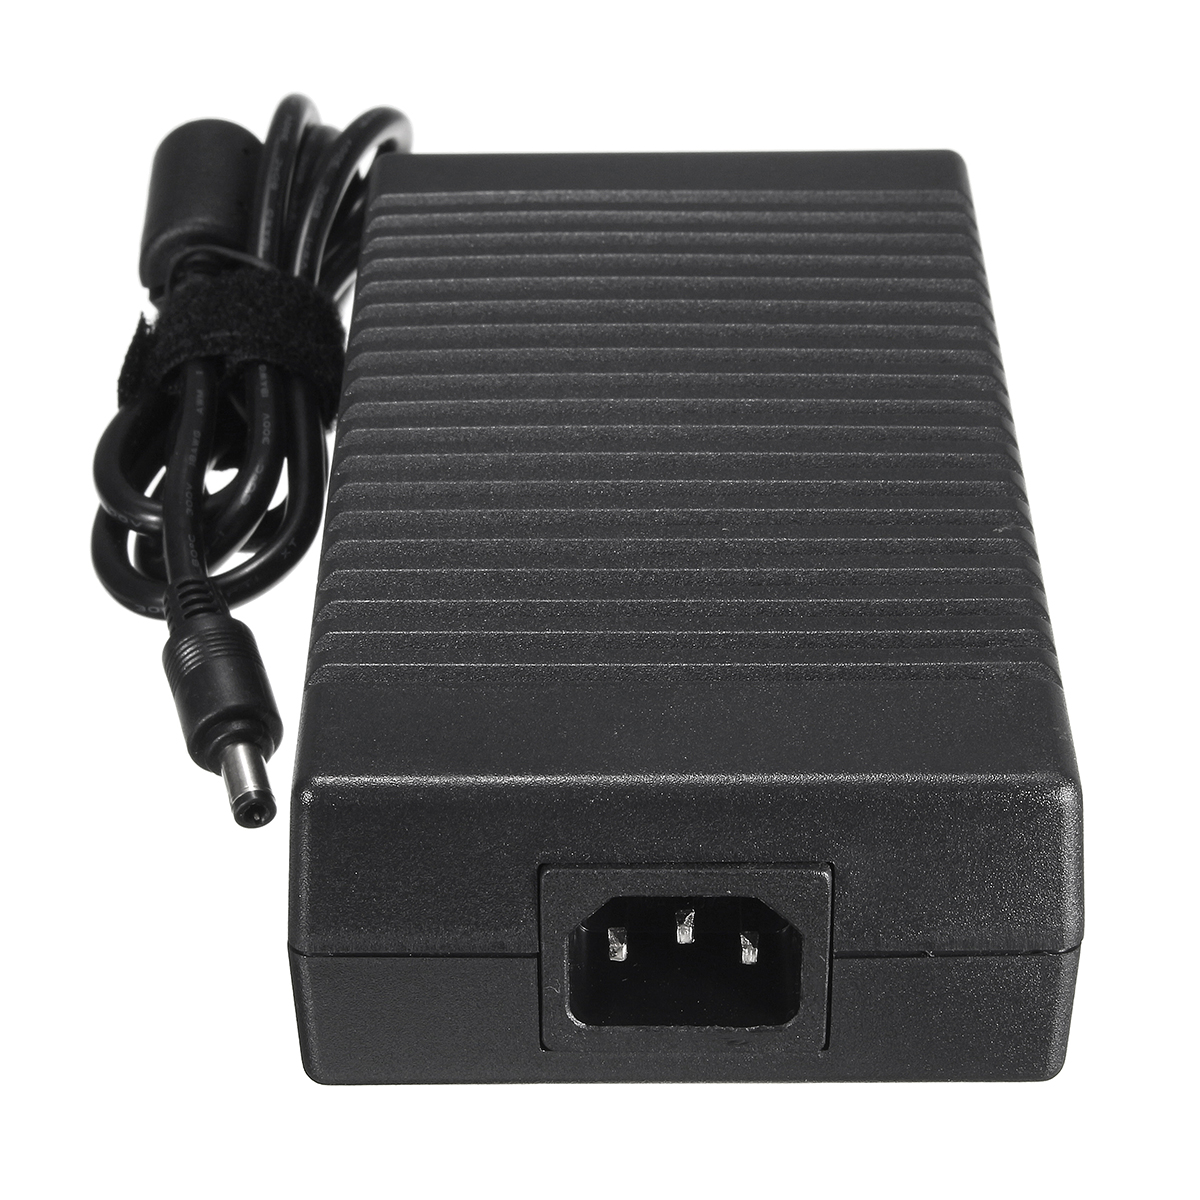 180W-19V-95A-AC-Adapter-Charger-Power-for-MSI-GT60-GT70-Notebook-Laptop-Power-Connector-1122990